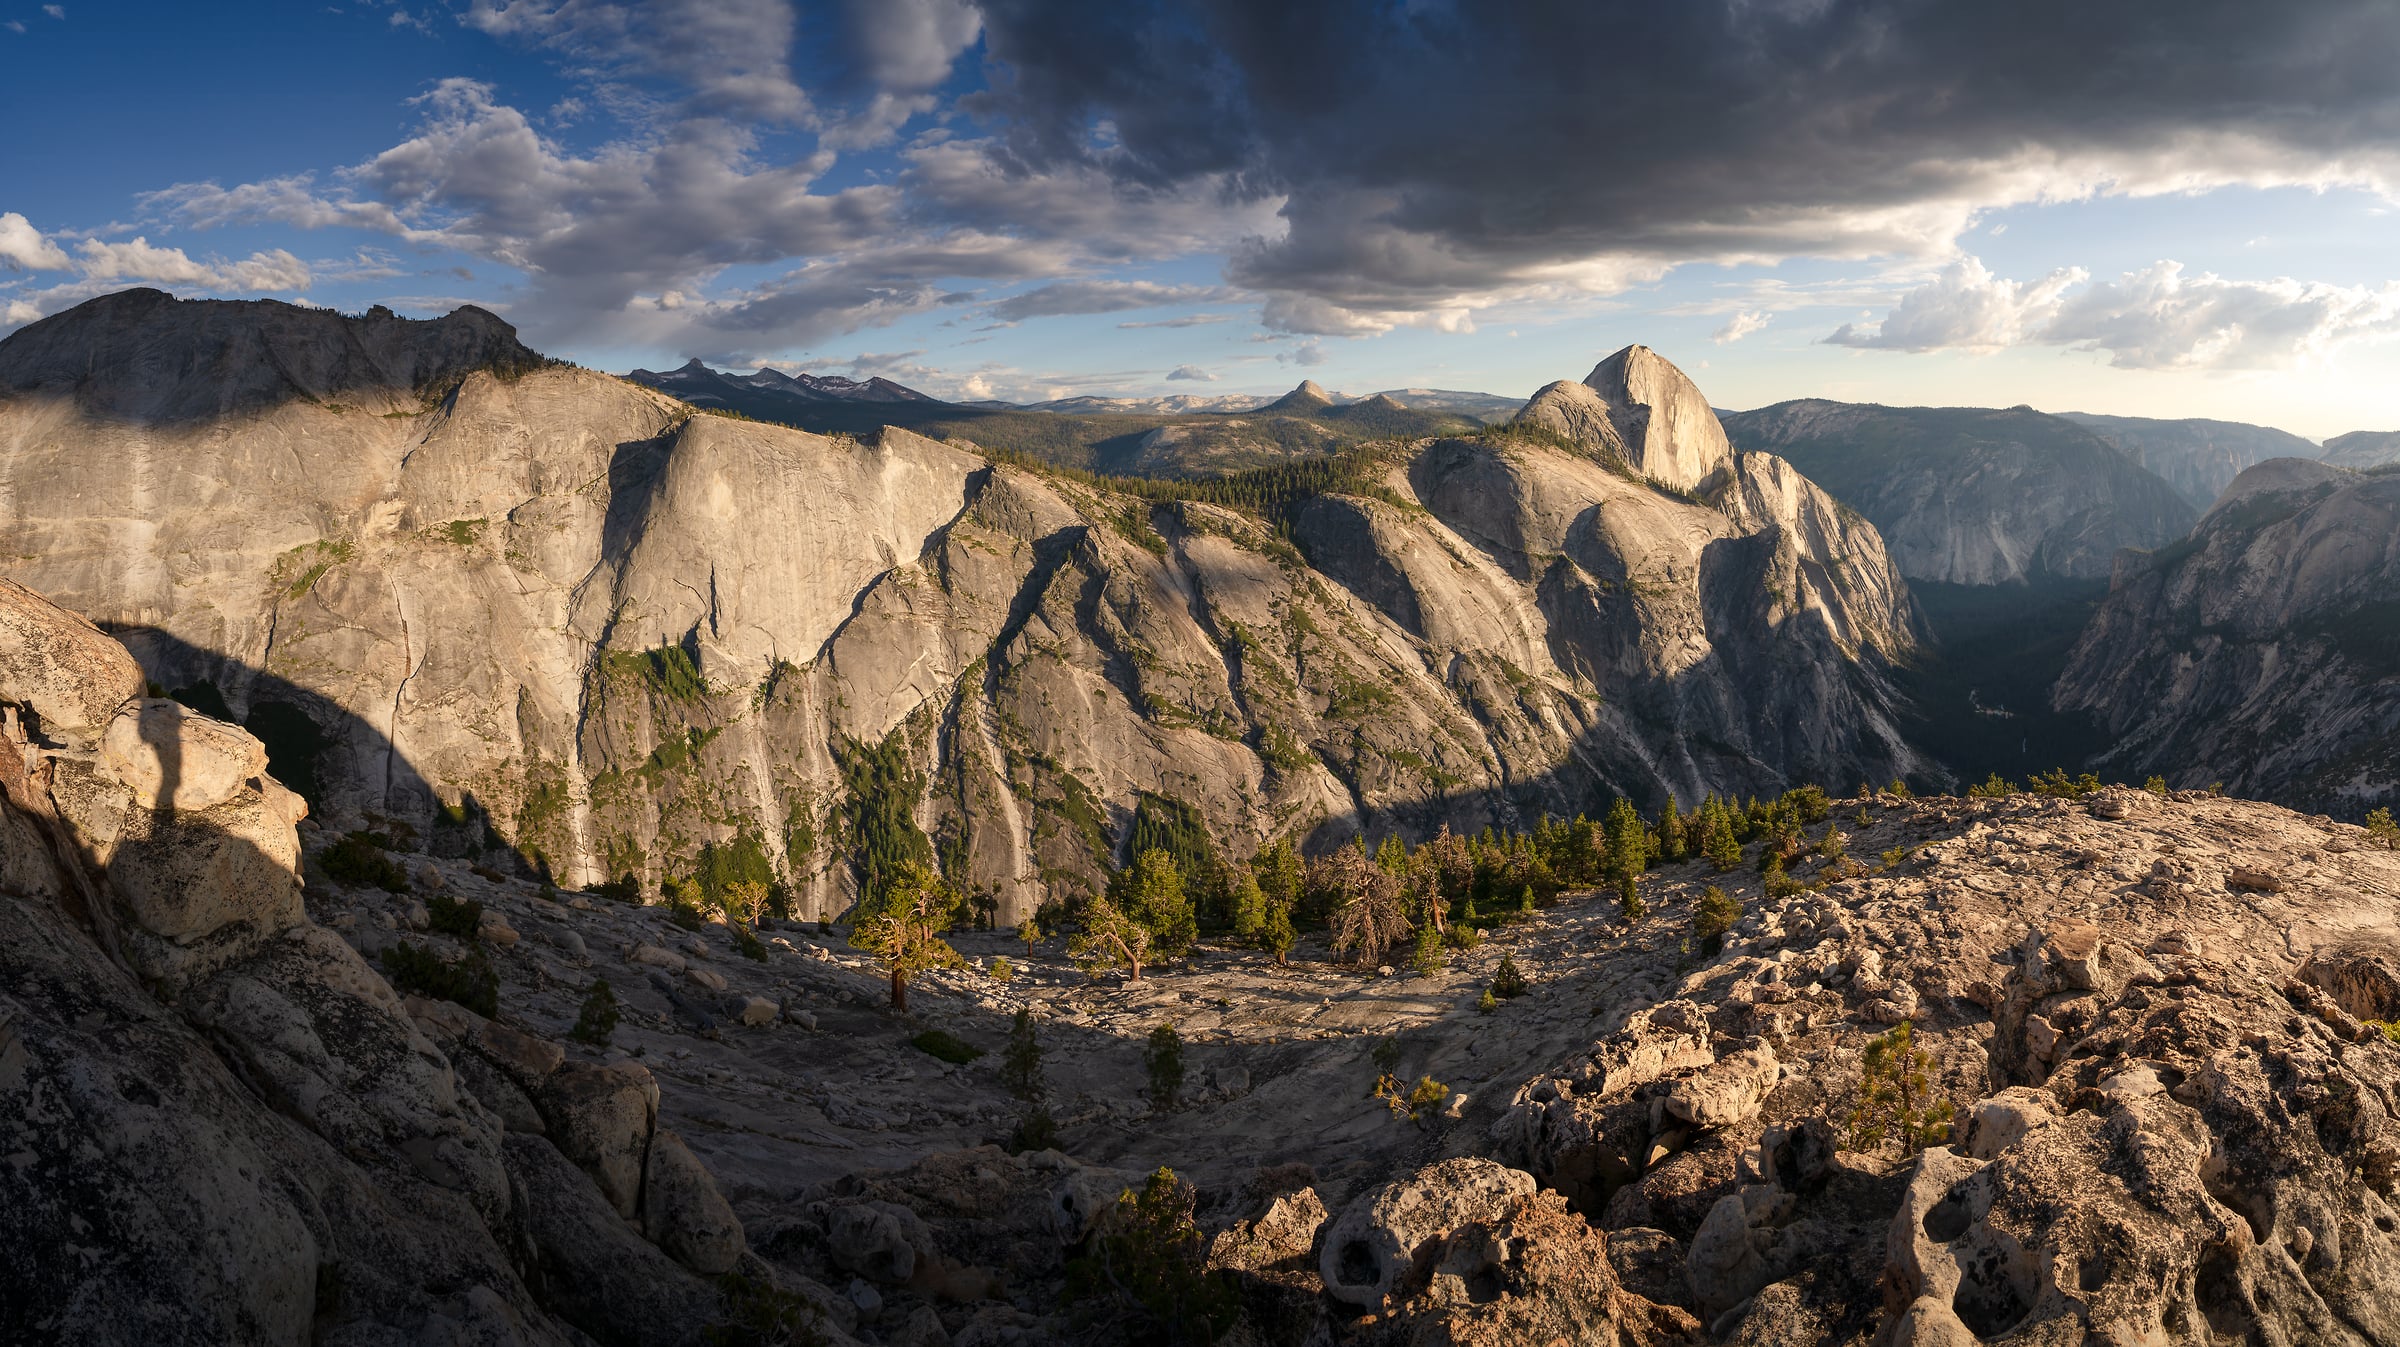 185 megapixels! A very high resolution, large photo print of the Dragon's Back mountain ridge in Yosemite National Park with cliff faces, mountains, and valleys; fine art photograph created by Jeff Lewis in California.